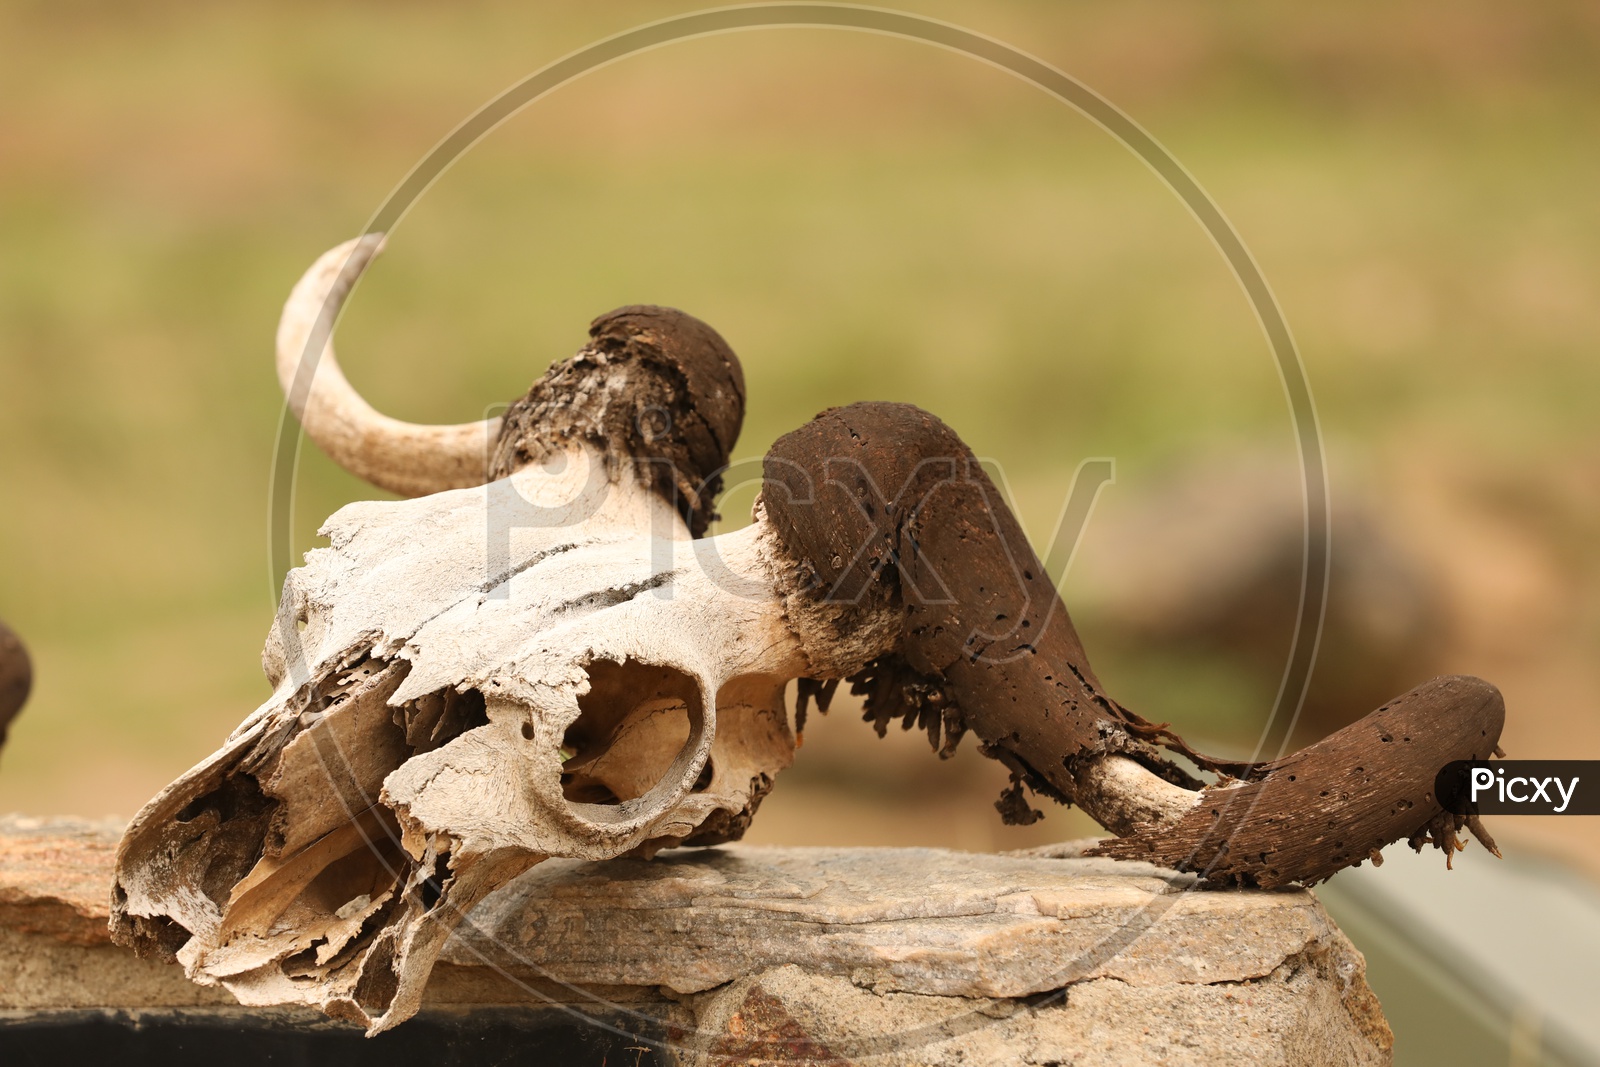 Skull Of Died Animals With Wild Horns